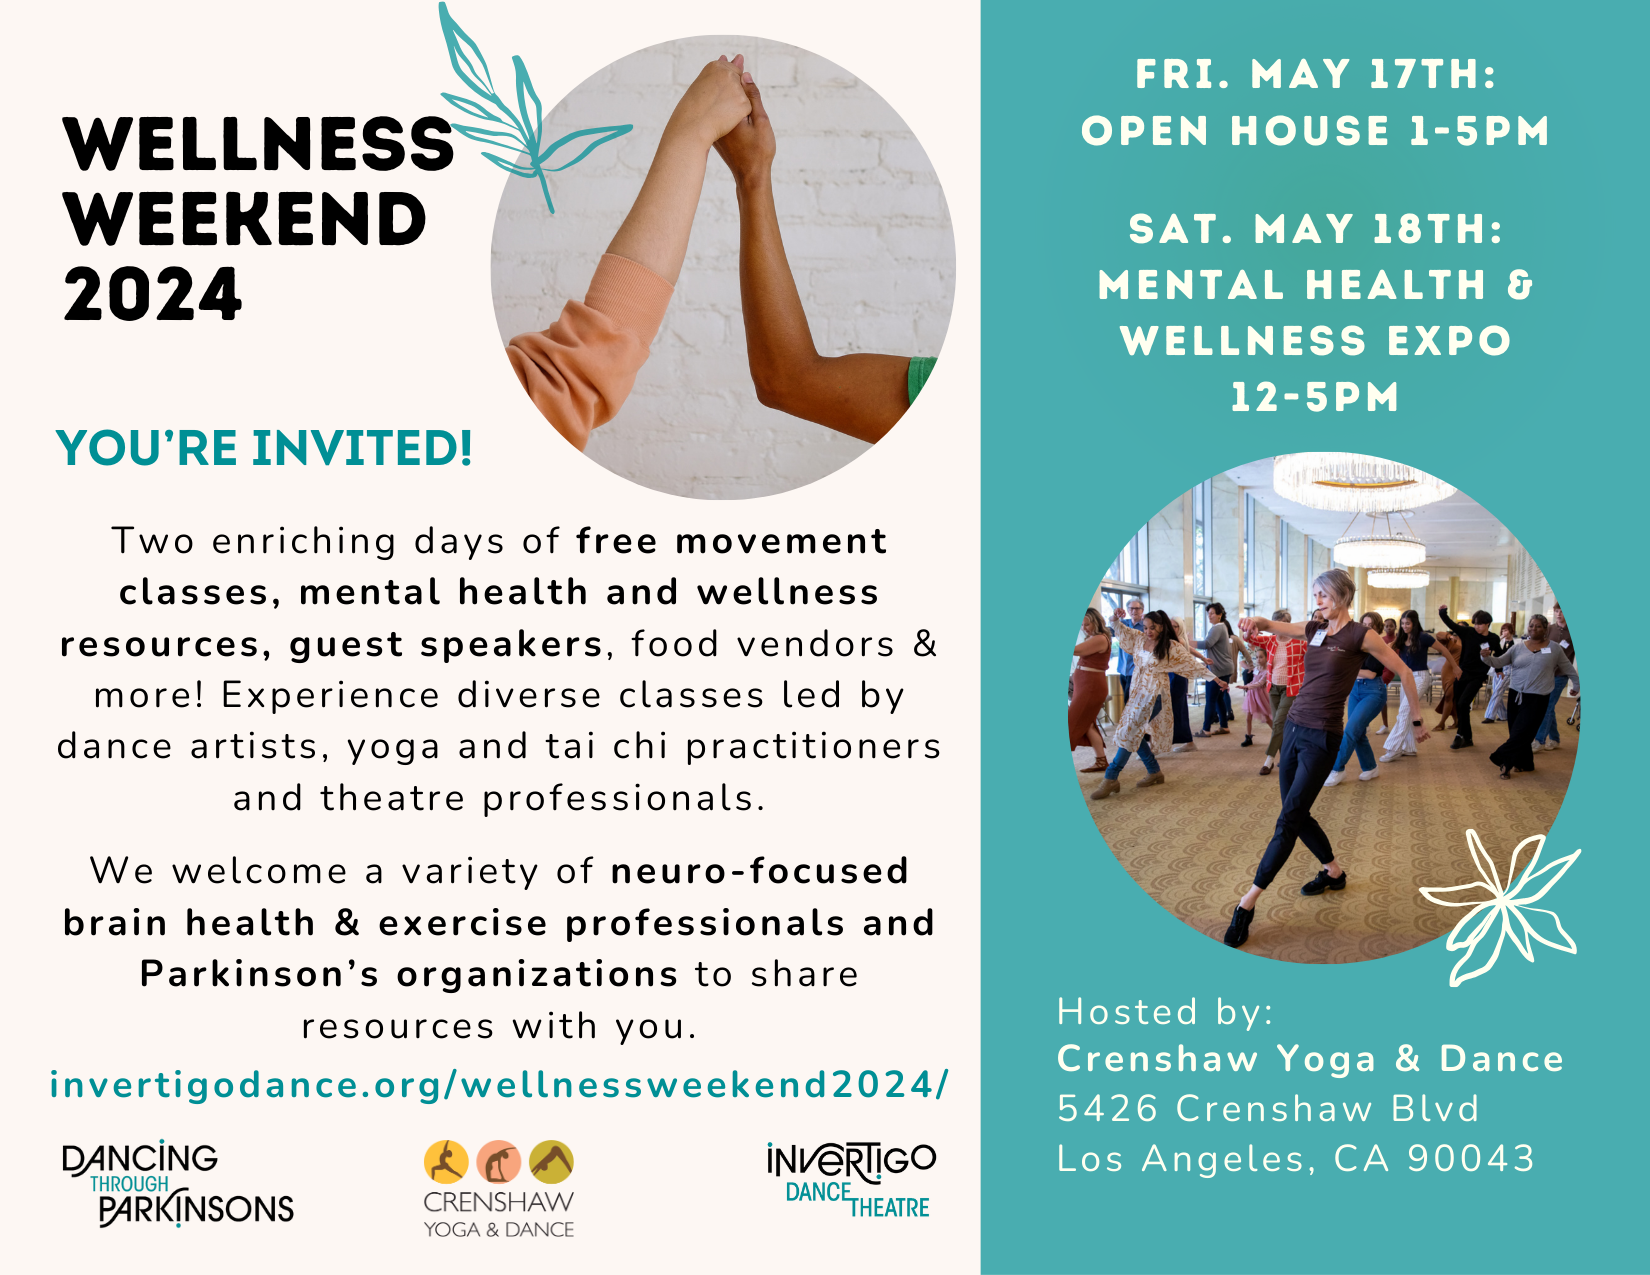 Dancing Through Parkinson’s is thrilled to be participating in Mental Health Awareness month, May 2024. Bringing classes, resources, and community! Get to know Dancing Through Parkinson’s and the mental health and wellness resources that are available to you!